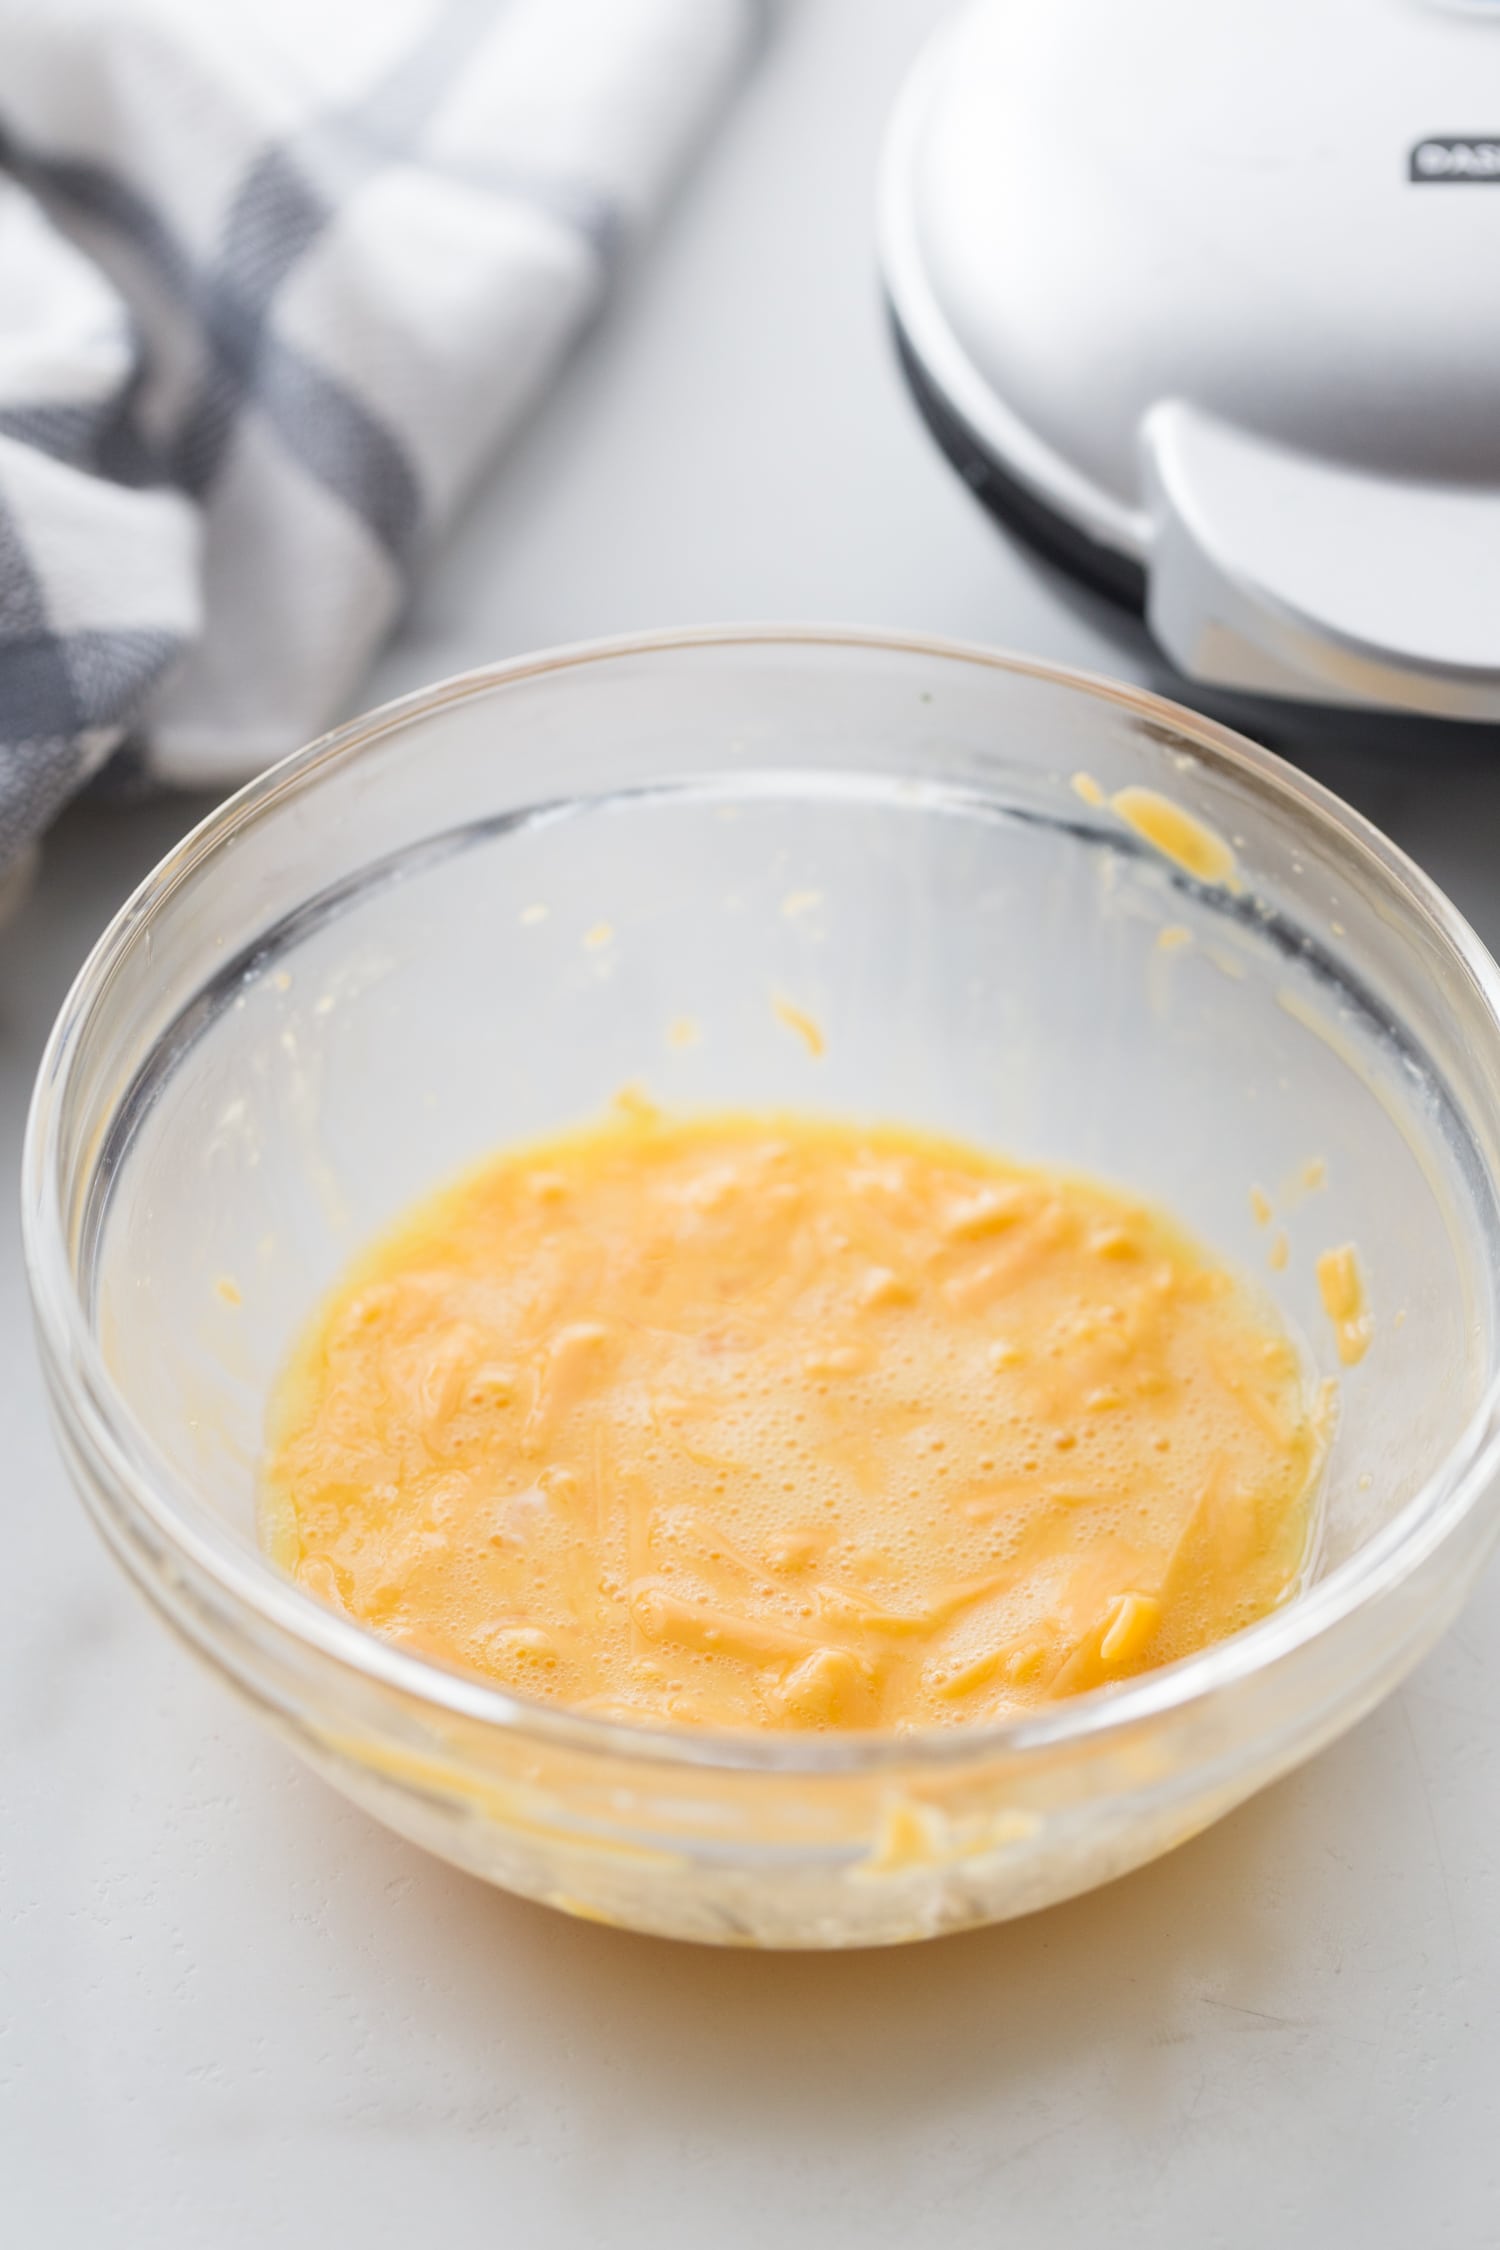 grated cheese and egg combined in a glass bowl